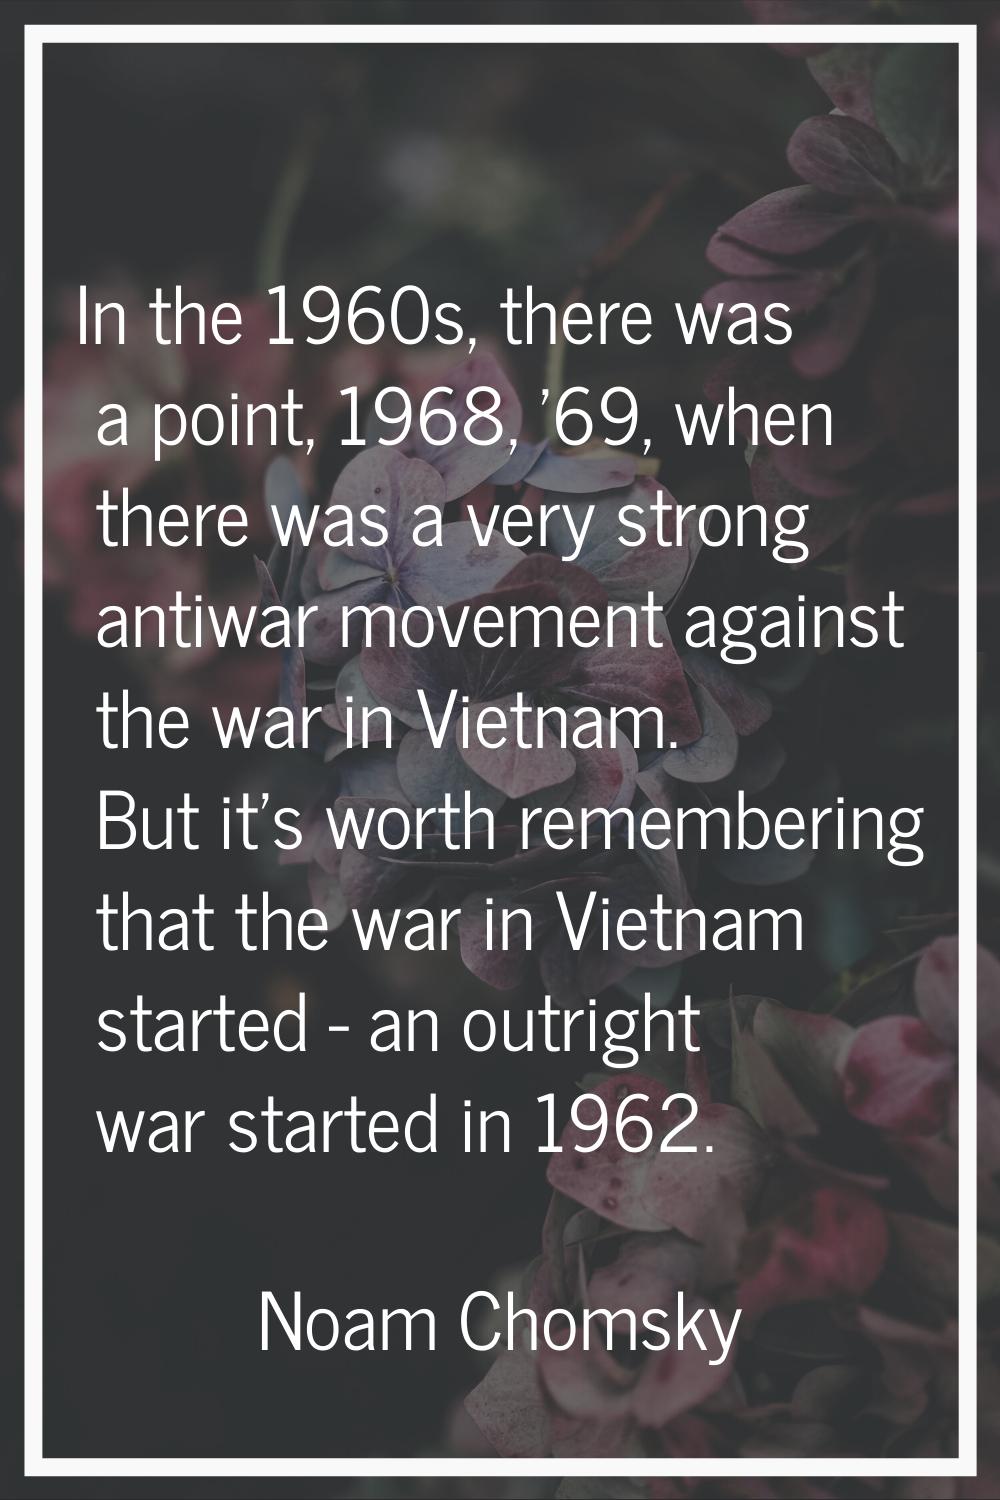 In the 1960s, there was a point, 1968, '69, when there was a very strong antiwar movement against t